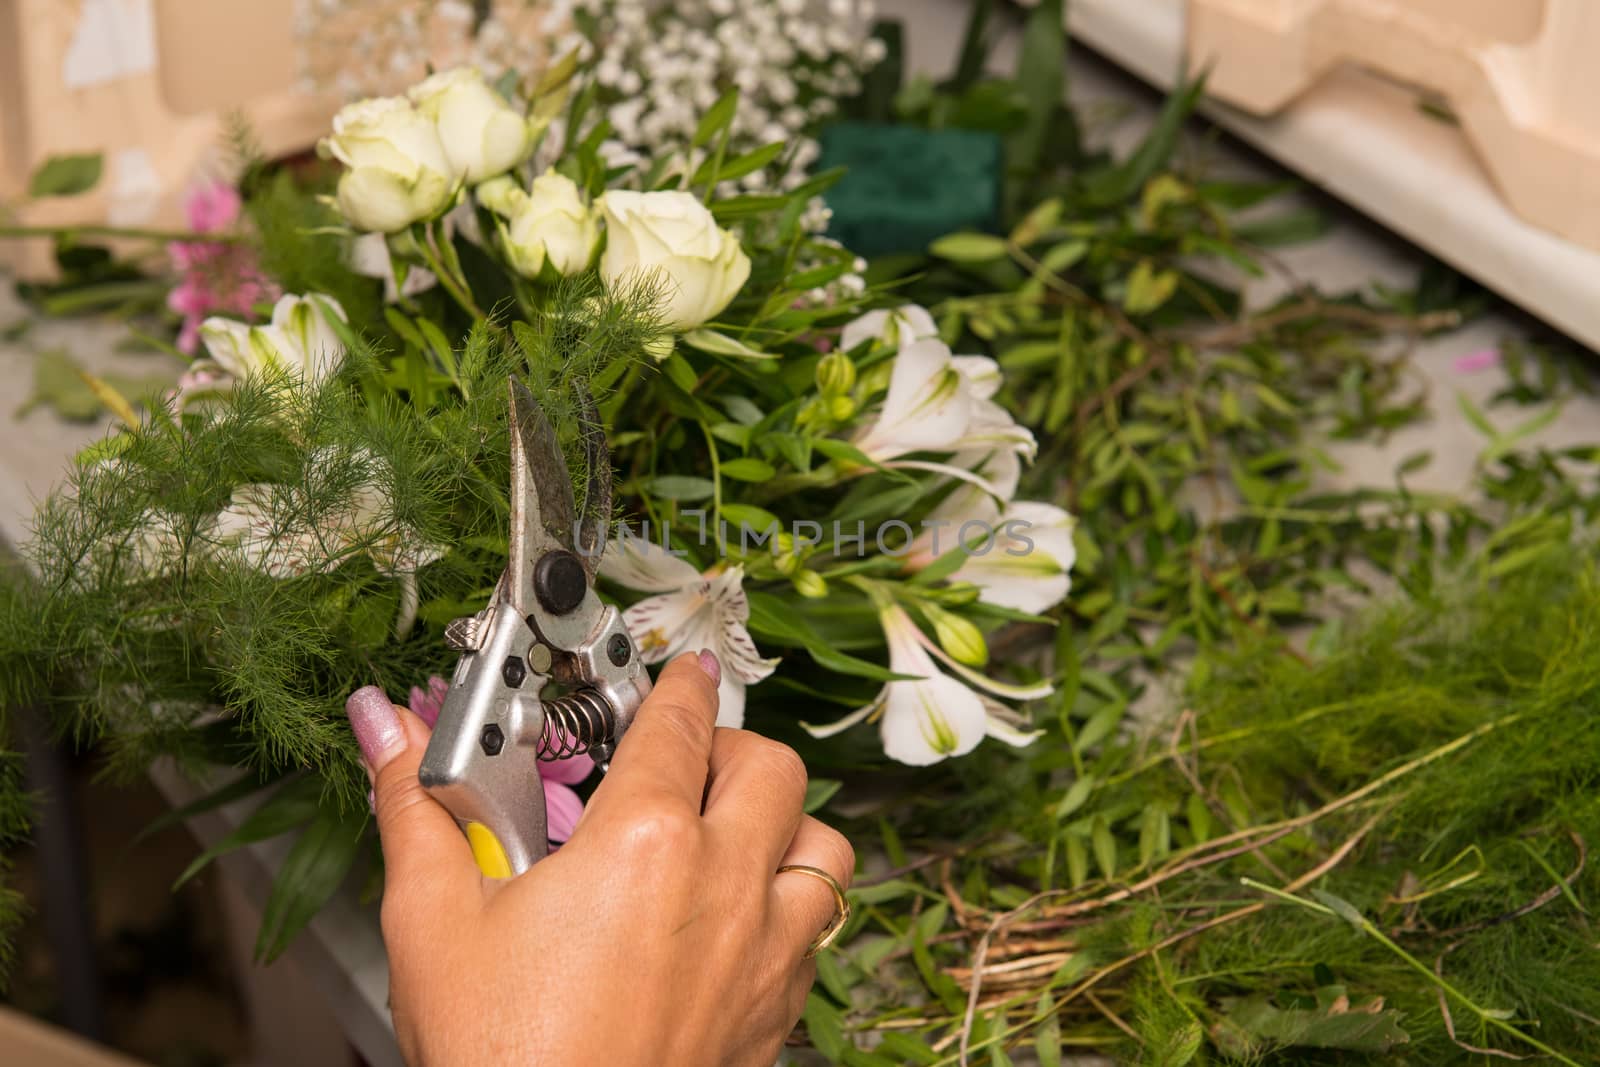 Florist at Work by viscorp